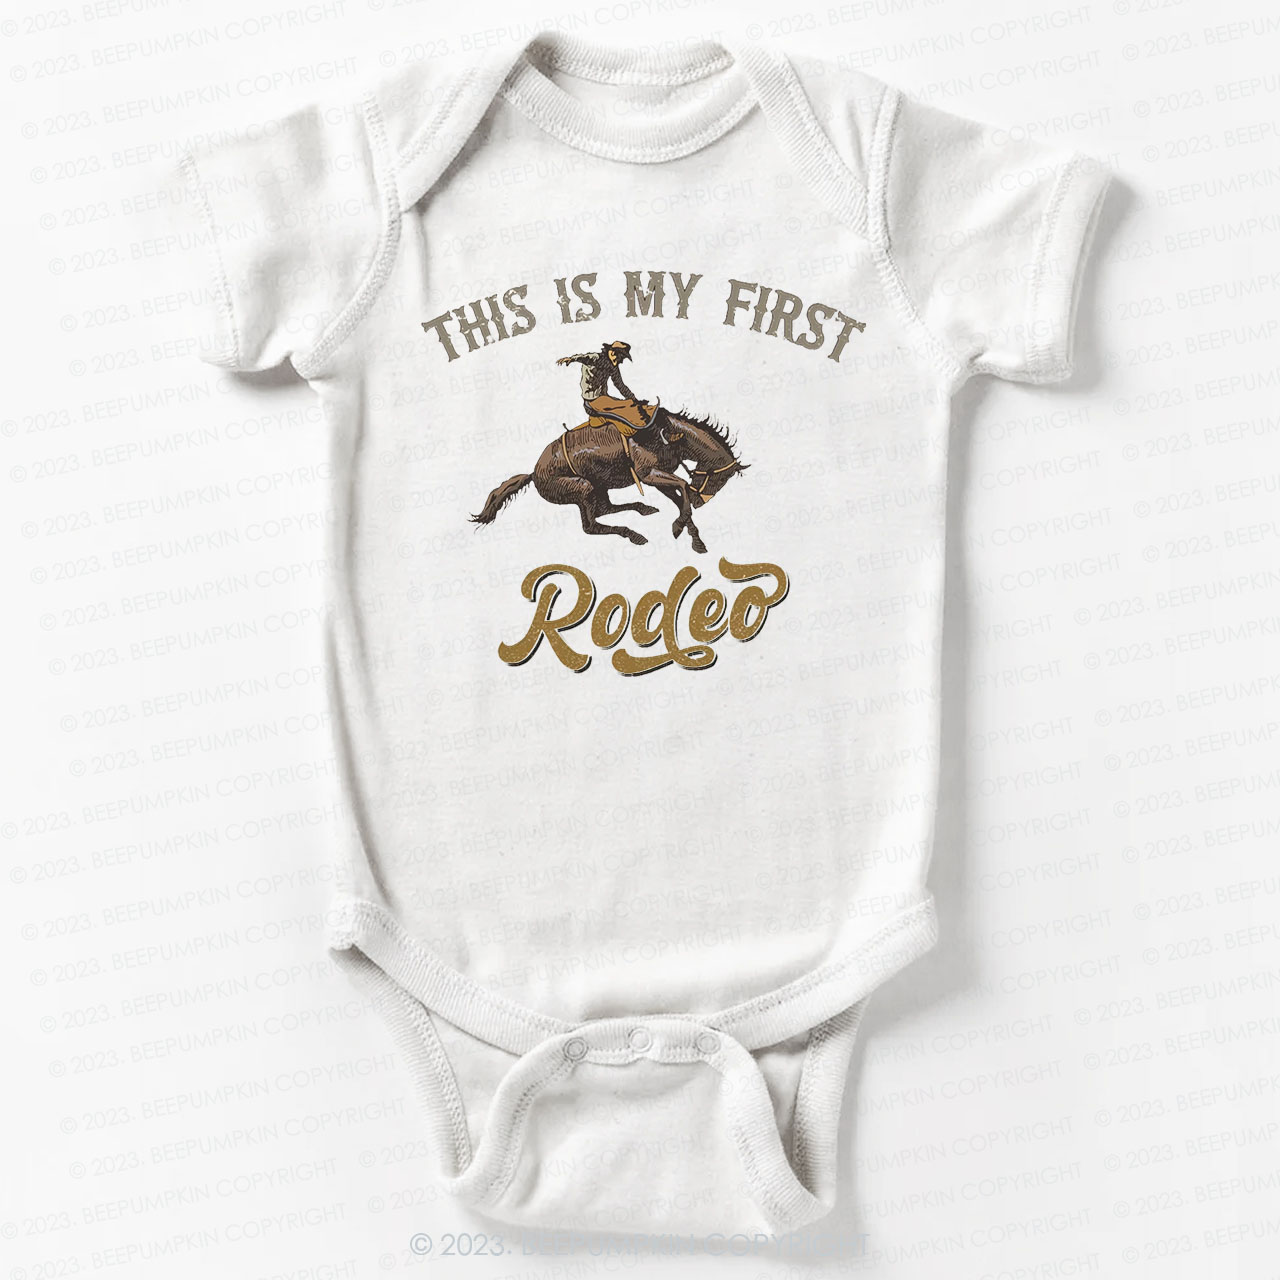 This Is My First Rodeo Cowboy Farm Bodysuit For Baby